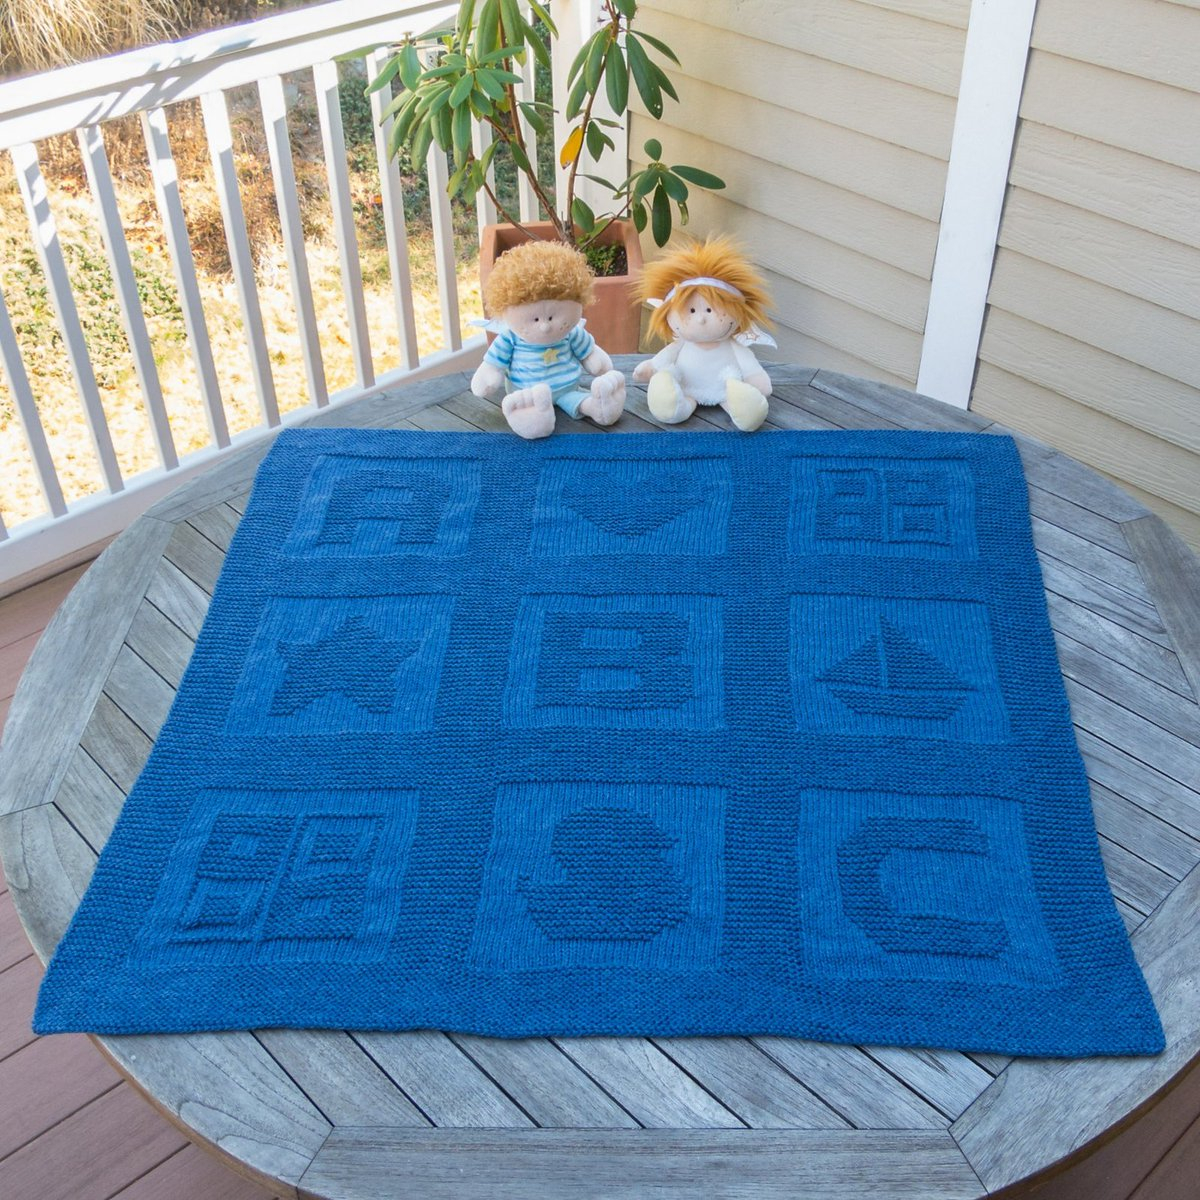 Free Knitting Patterns For Baby Blankets Terry Matz On Twitter Free Knitting Pattern For Easy As Abc Ba